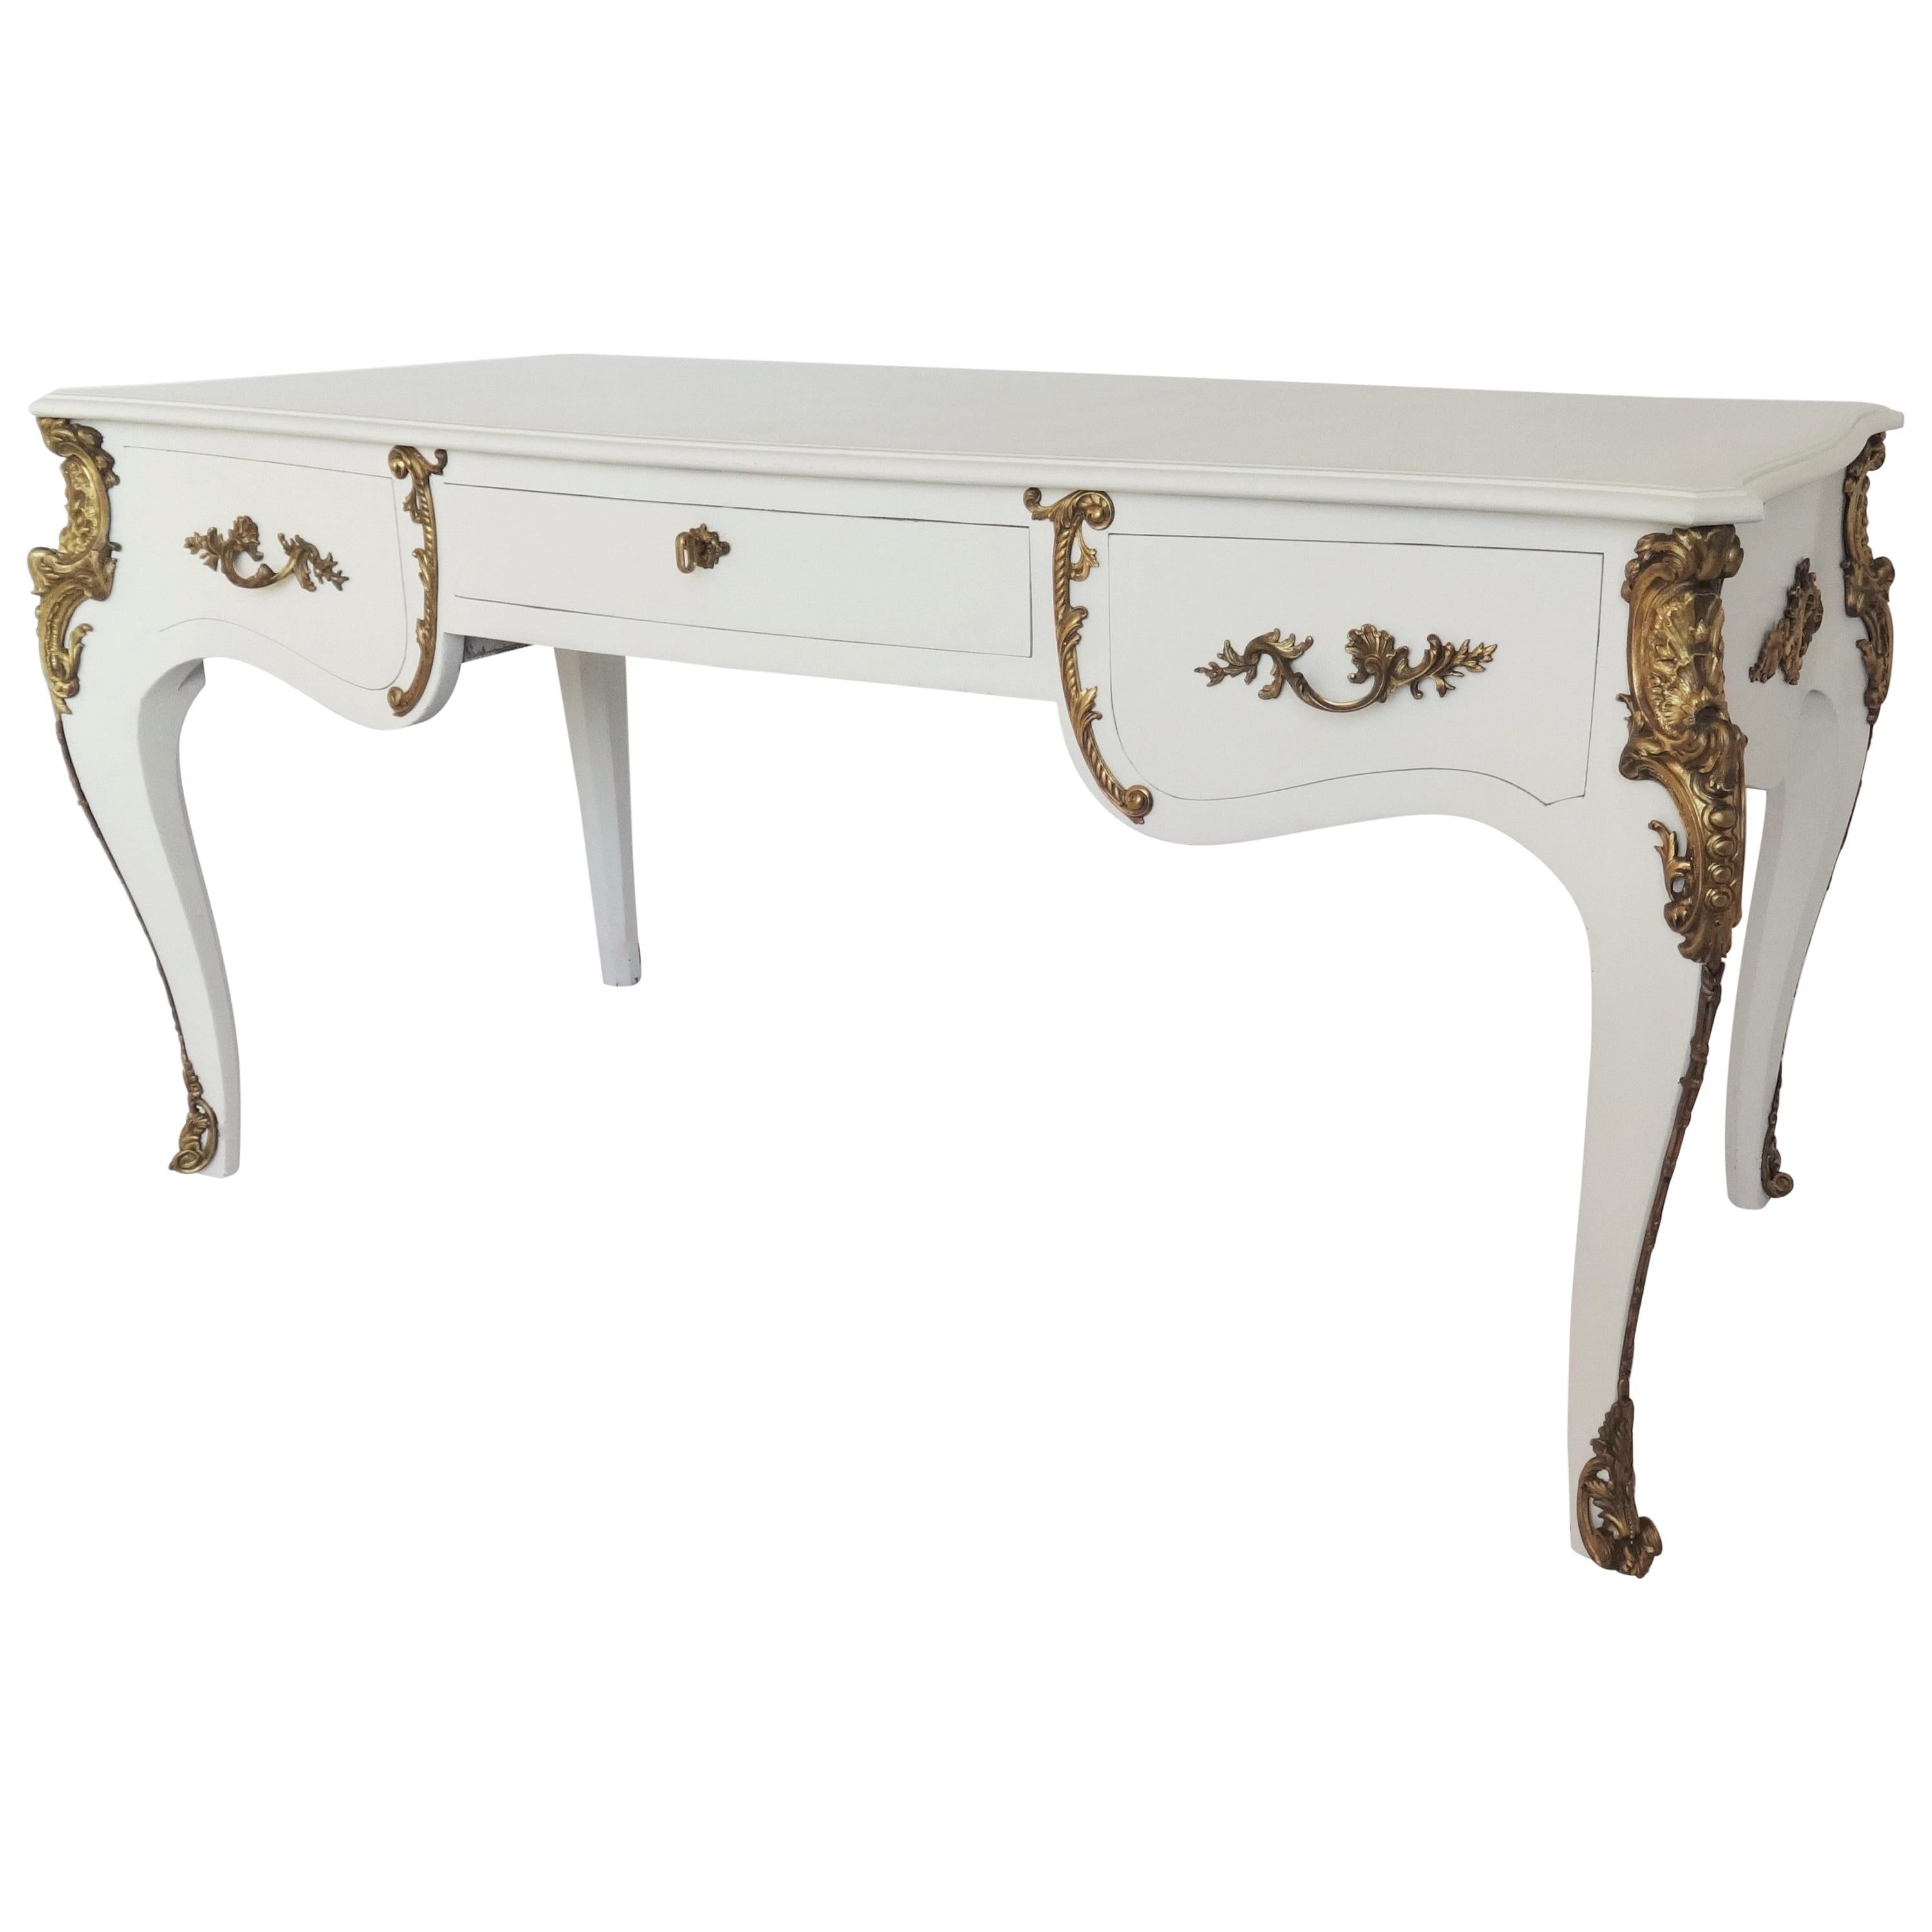 Louis XV Style Lacquered and Gilt Bronze-Mounted Bureau Plat For Sale